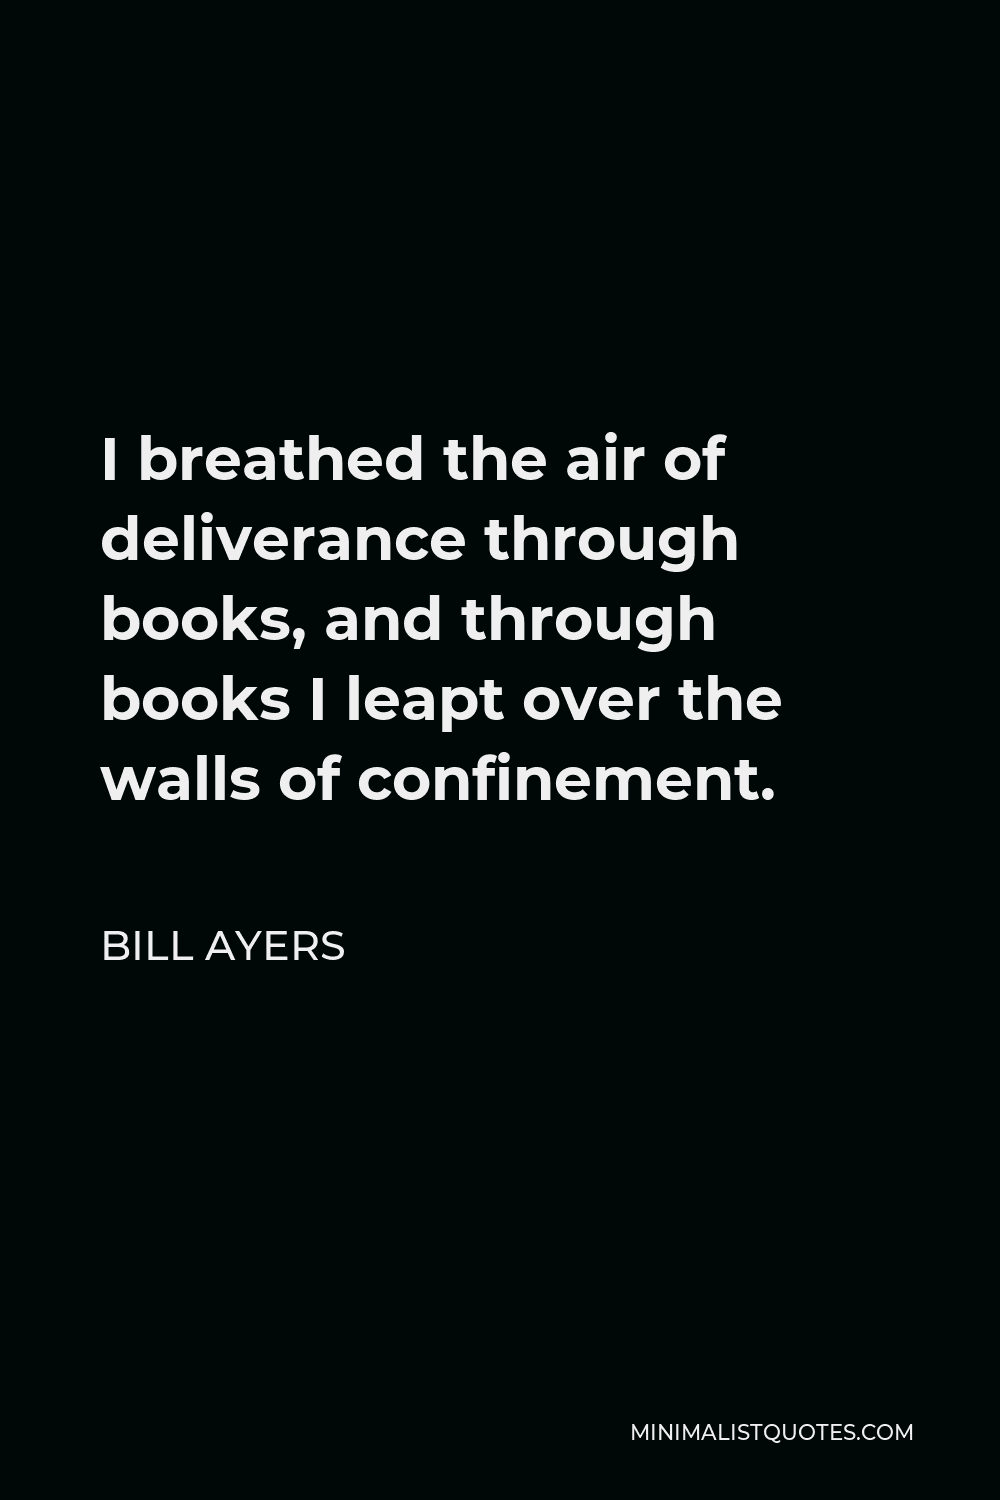 Bill Ayers Quote - I breathed the air of deliverance through books, and through books I leapt over the walls of confinement.